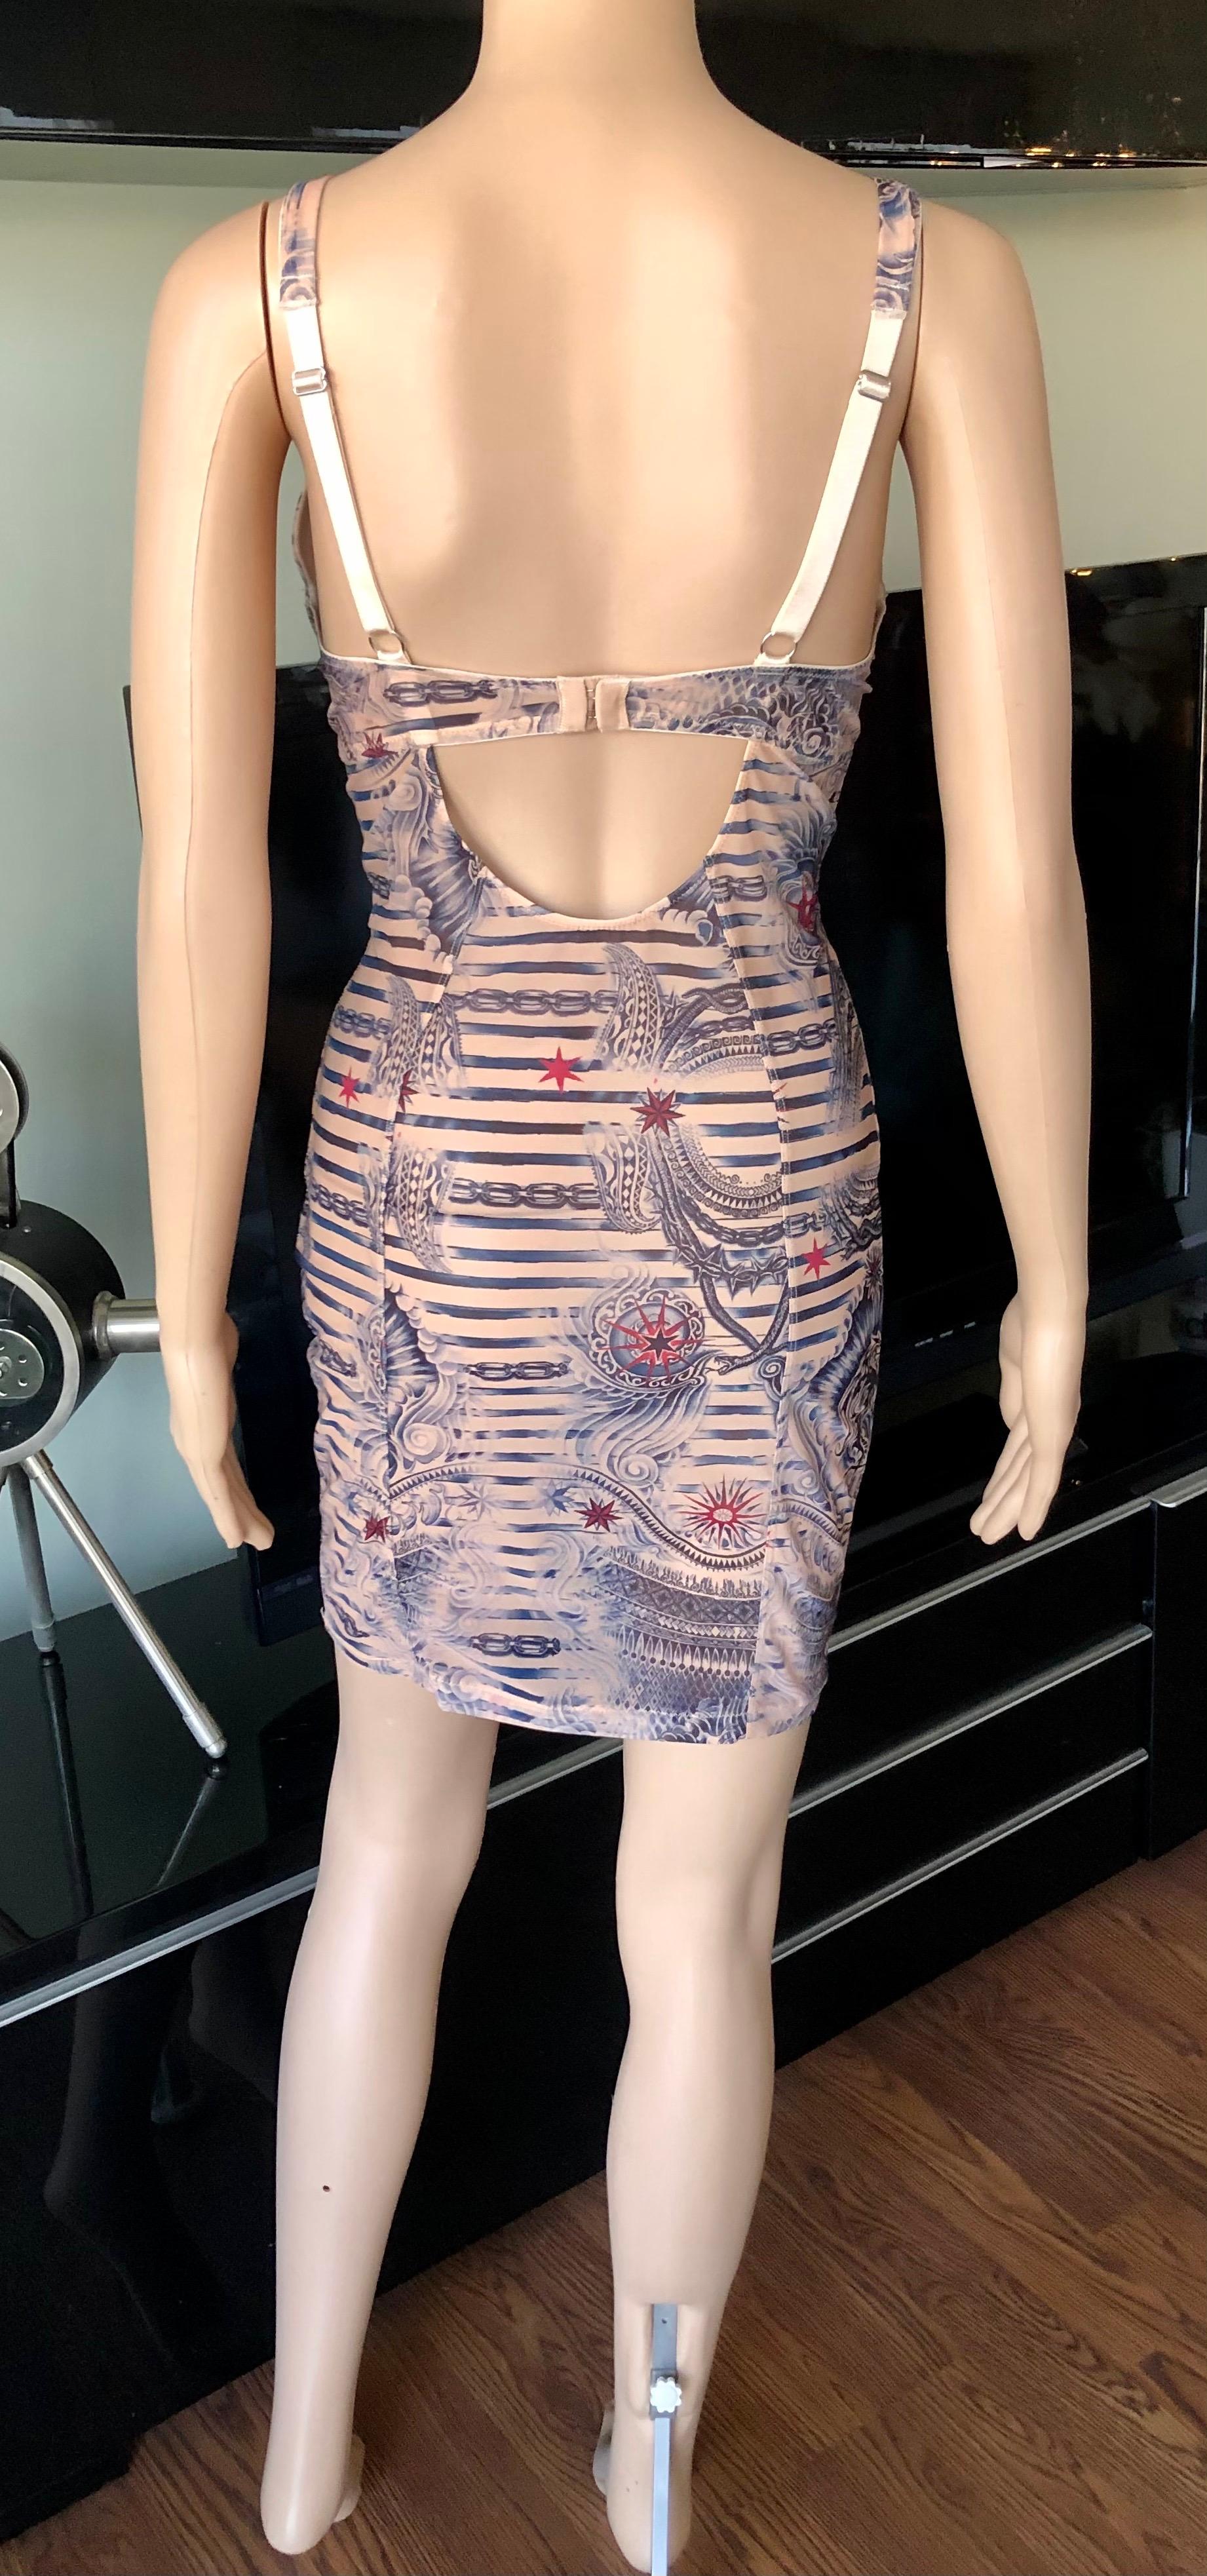 Jean Paul Gaultier Lindex 2014 Limited Edition Tattoo Print Bustier Bodycon Mesh Mini Dress Size 36C

Excellent Condition

